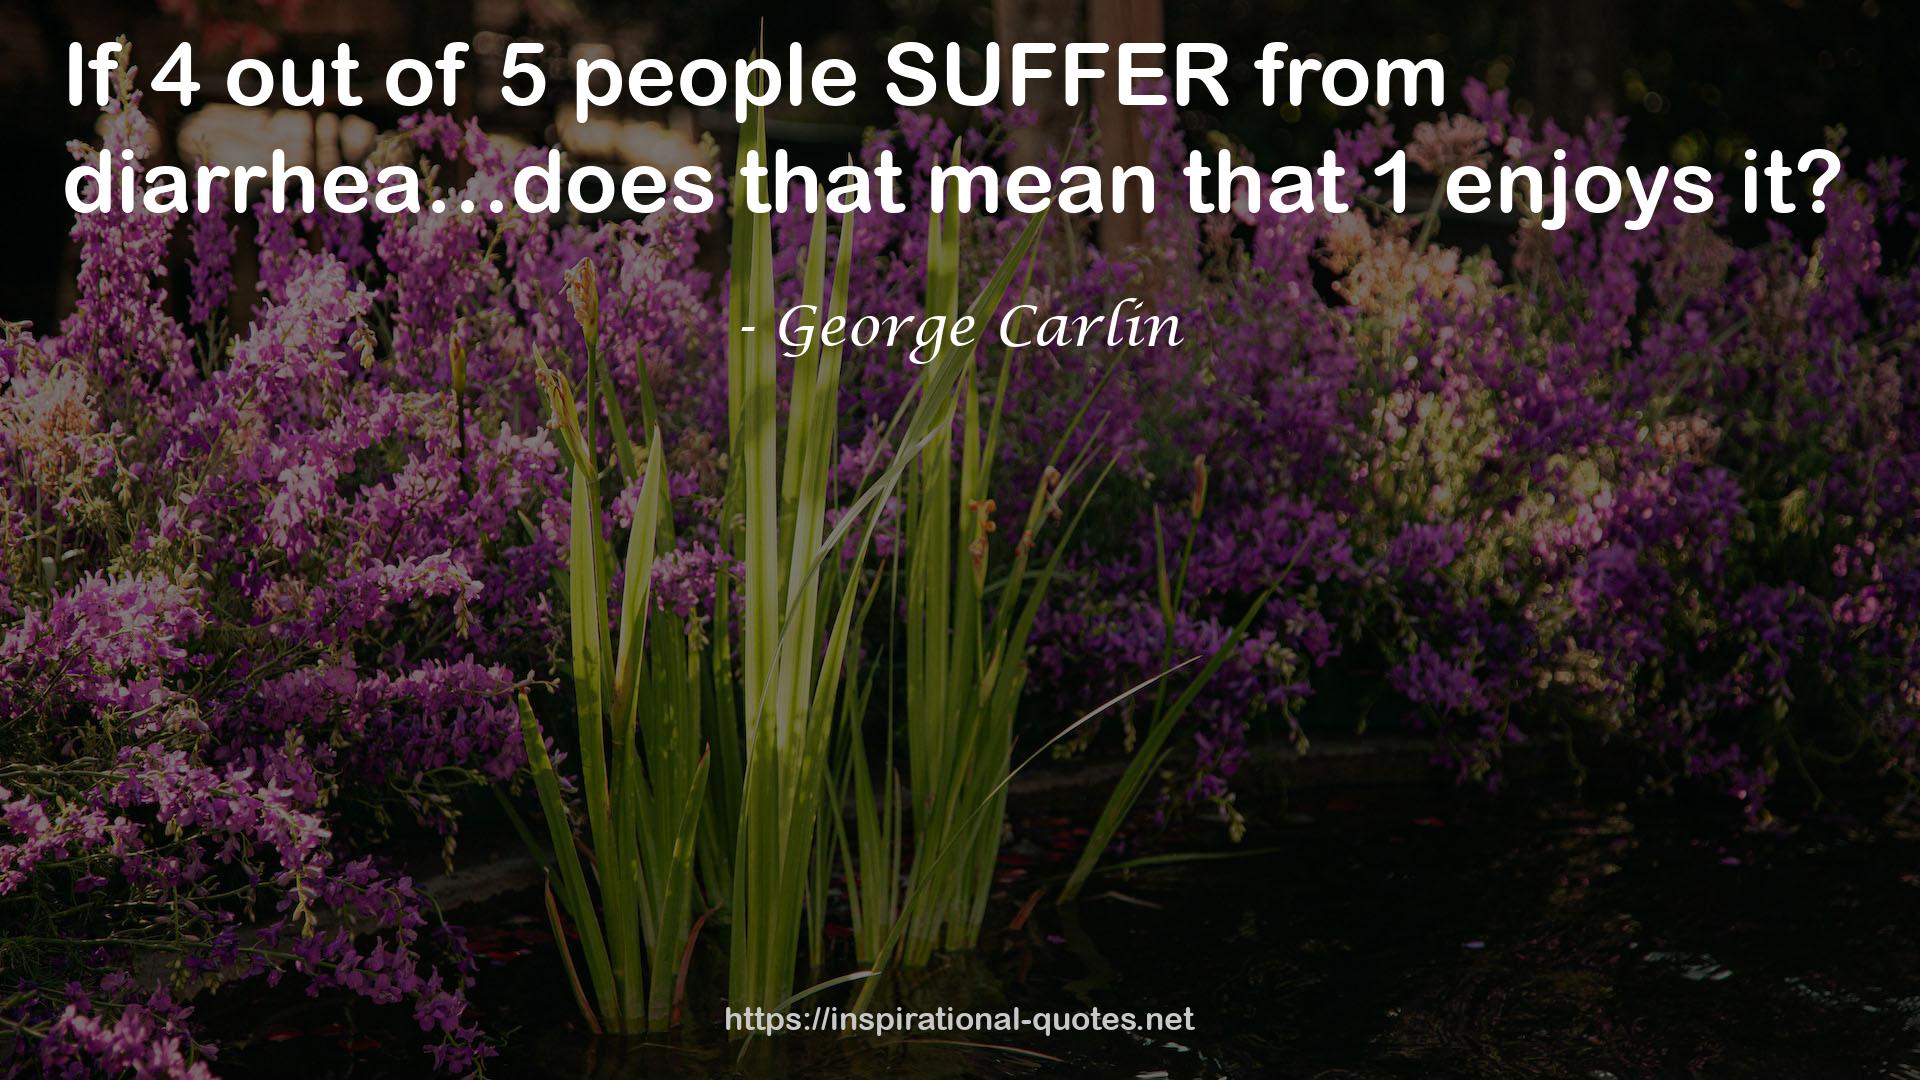 George Carlin QUOTES